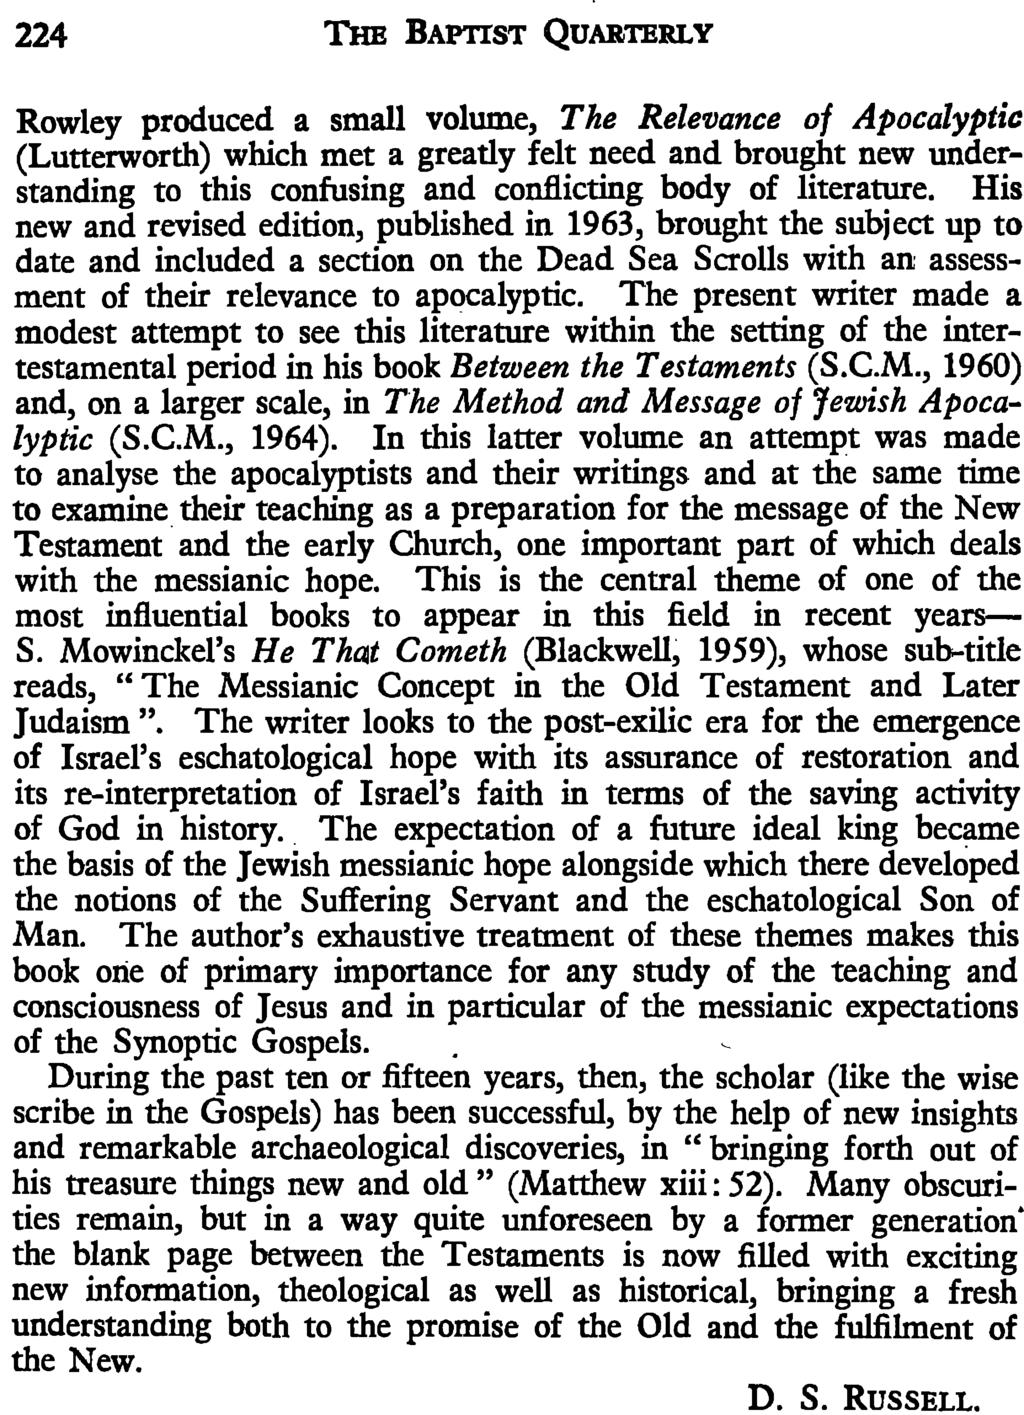 224 THE BAPTIST QUARTERLY Rowley produced a small volume, The Relevance of Apocalyptic (Lutterworth) which met a greatly felt need and brought new understanding to this confusing and conflicting body